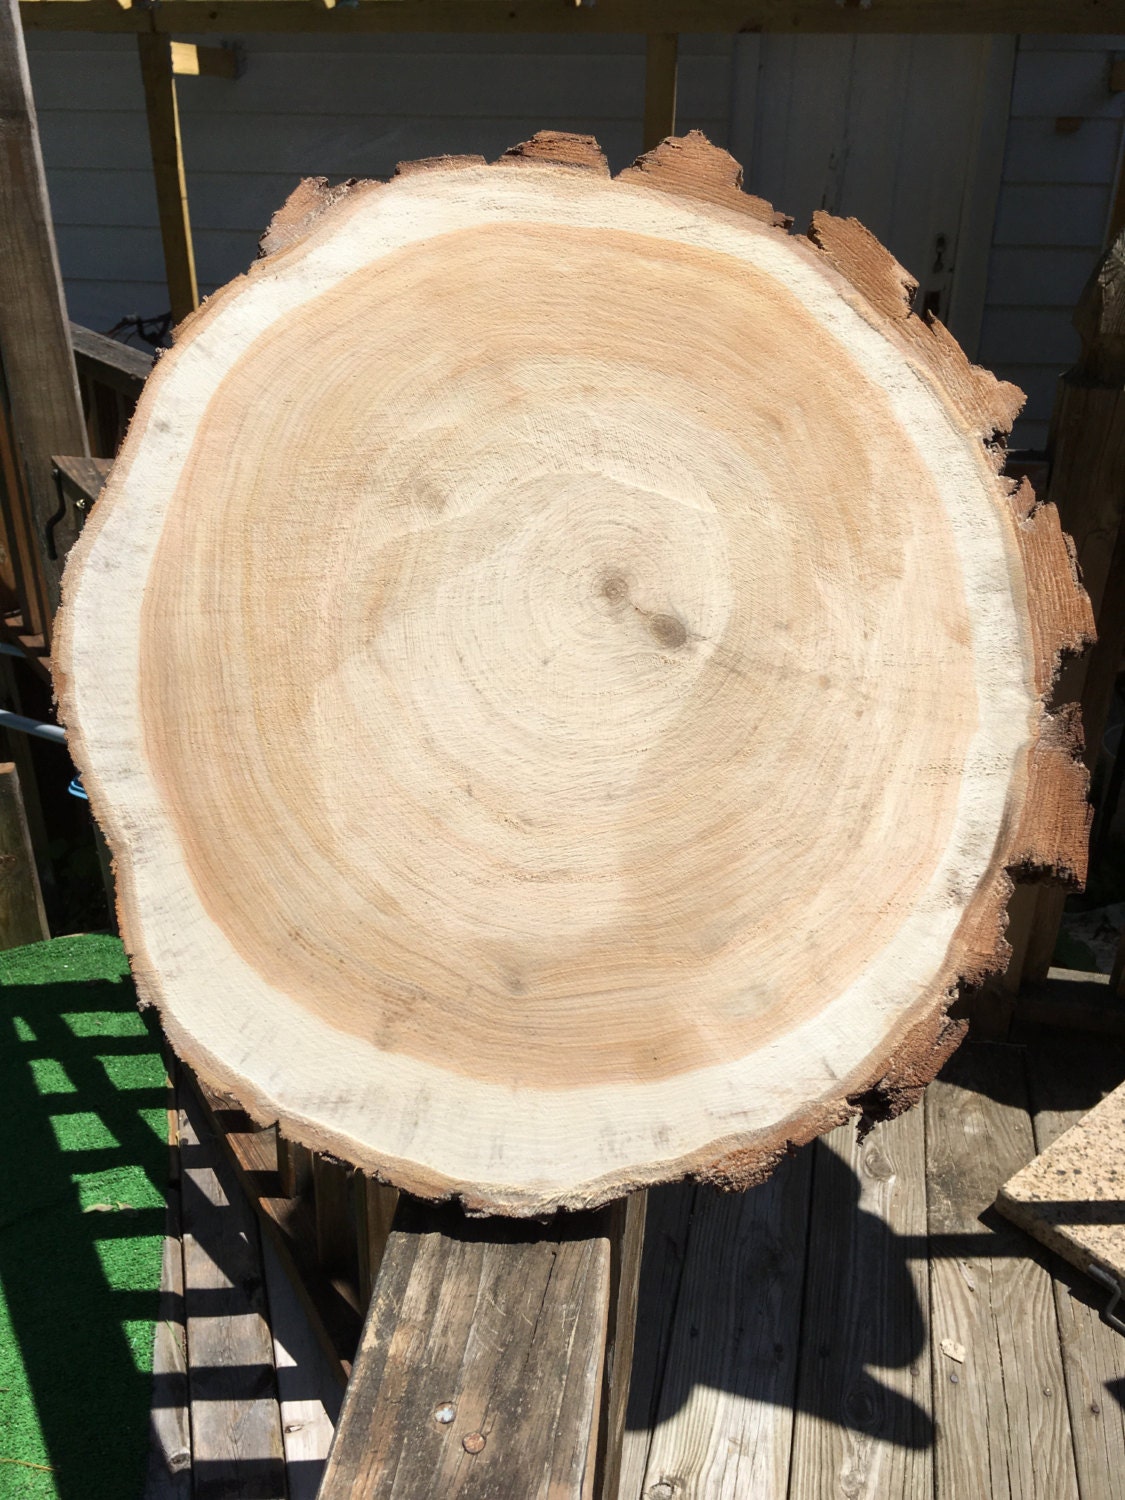 Wood elm slice 15 inch diameter 1.251.5 inch thick with bark